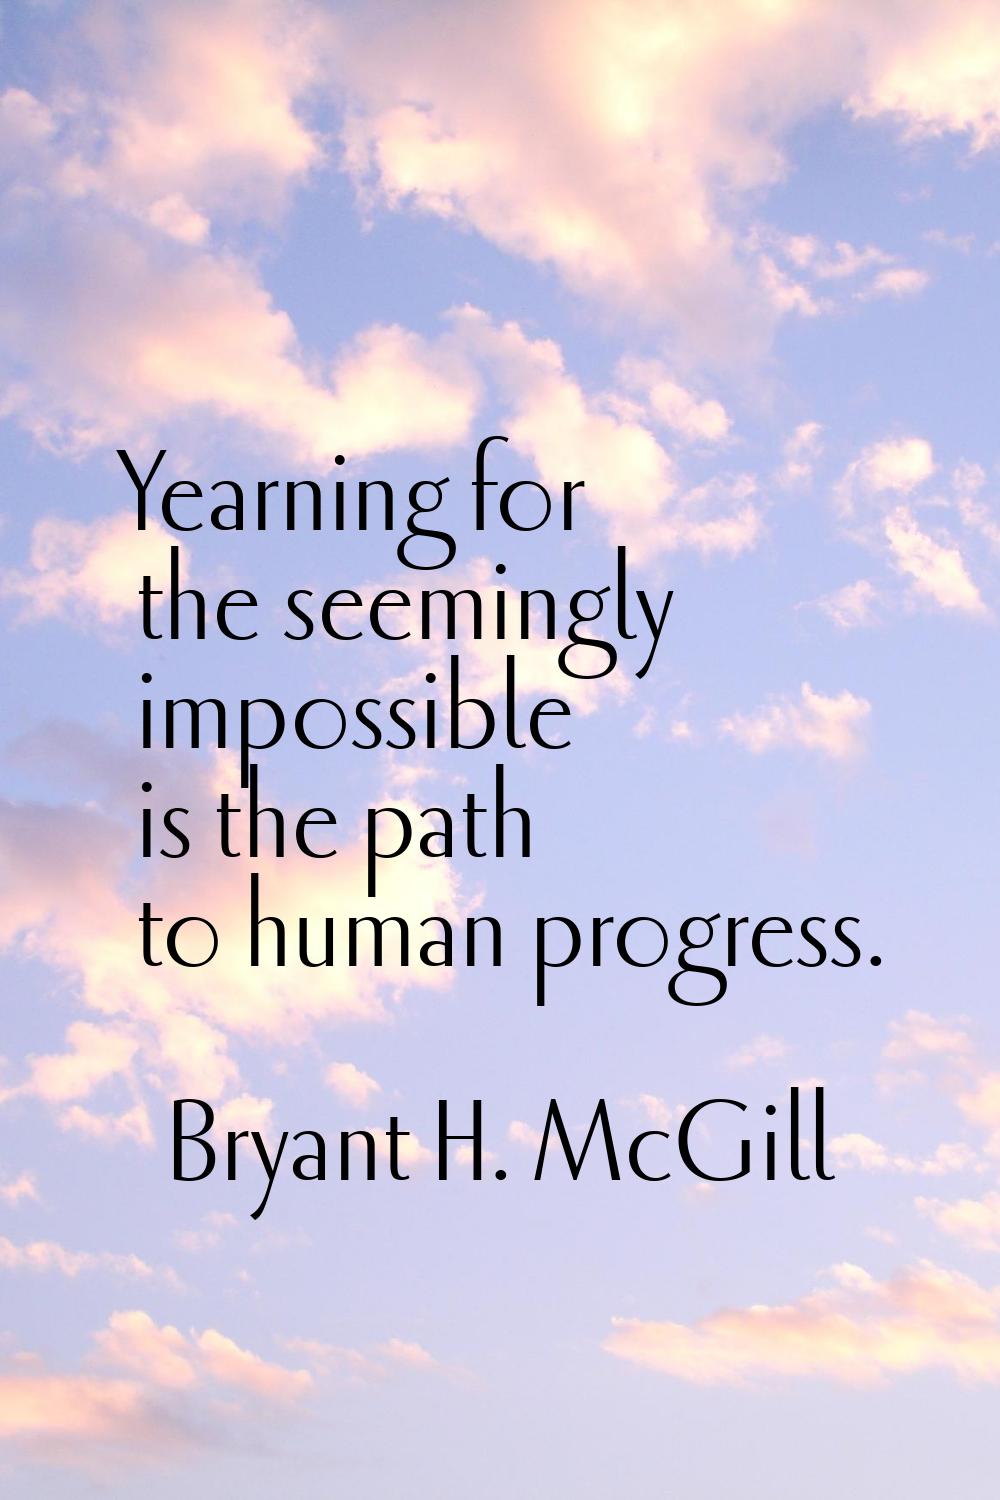 Yearning for the seemingly impossible is the path to human progress.